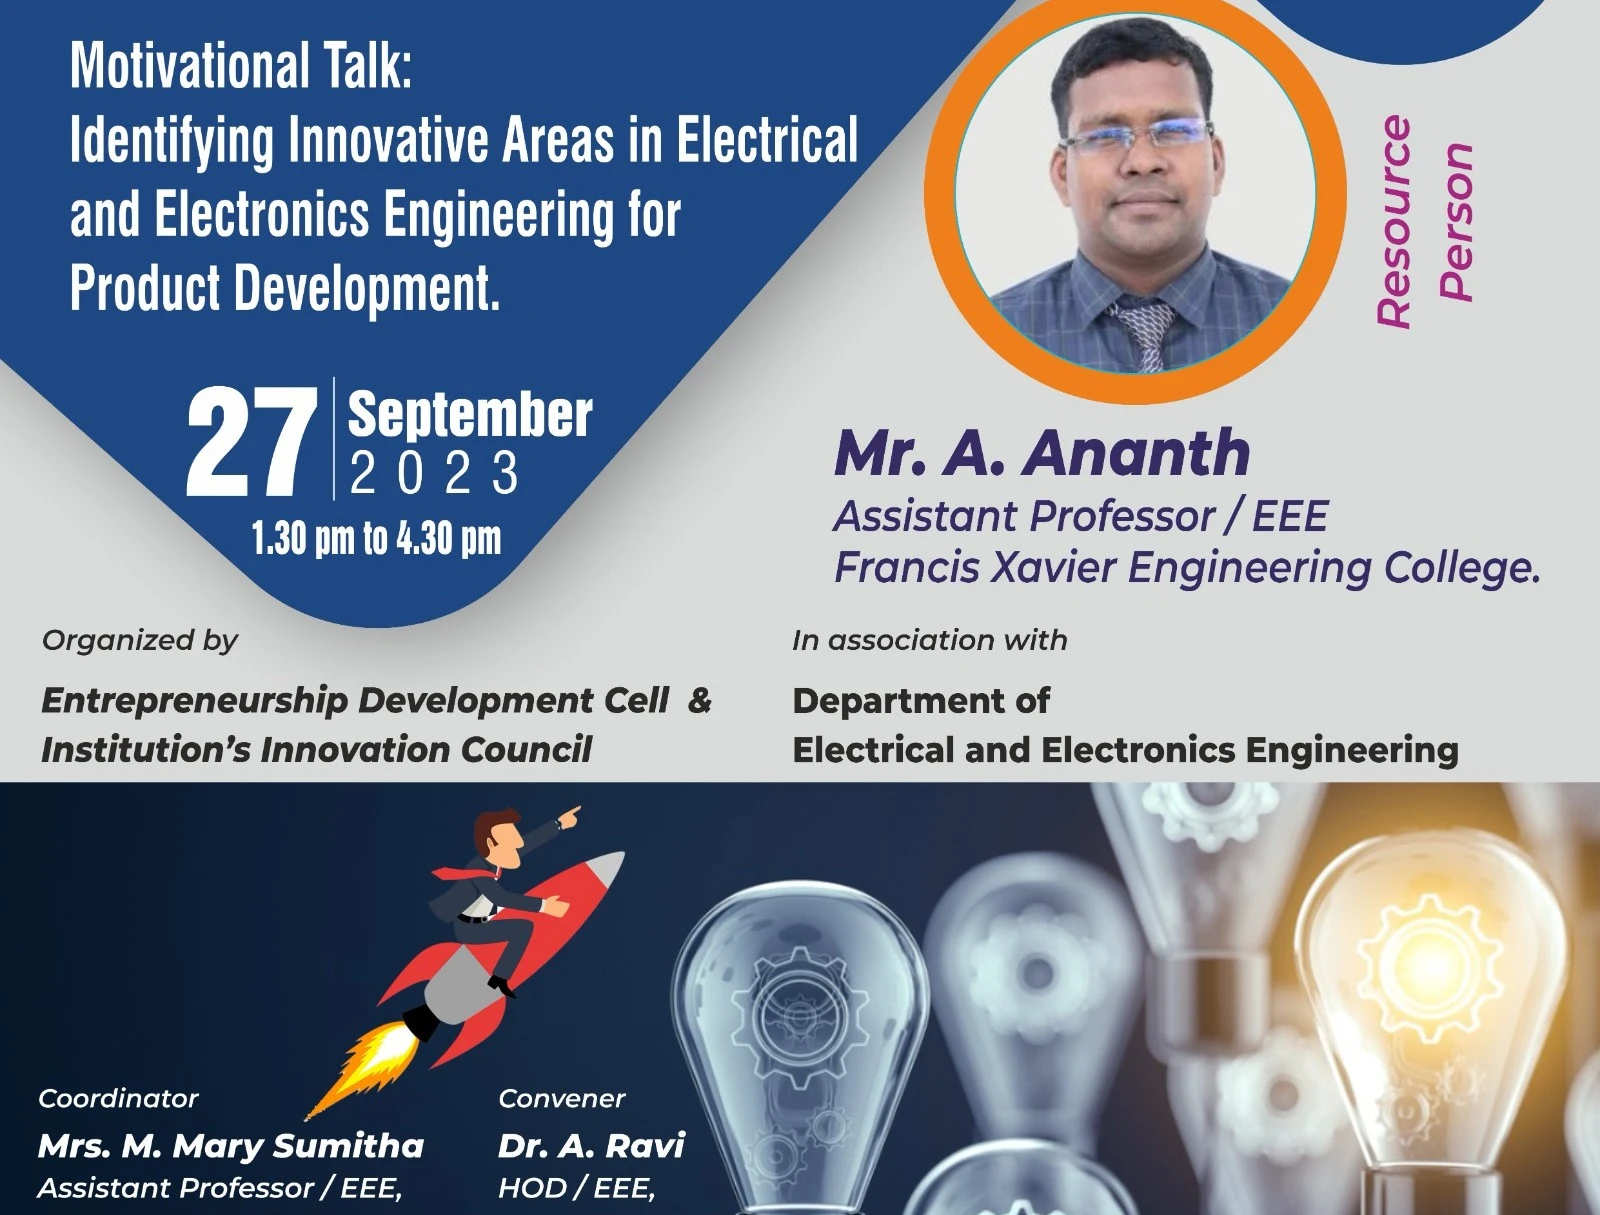  Motivational talk: Identifying Innovative areas in Electrical and Electronics Engineering for Product Development